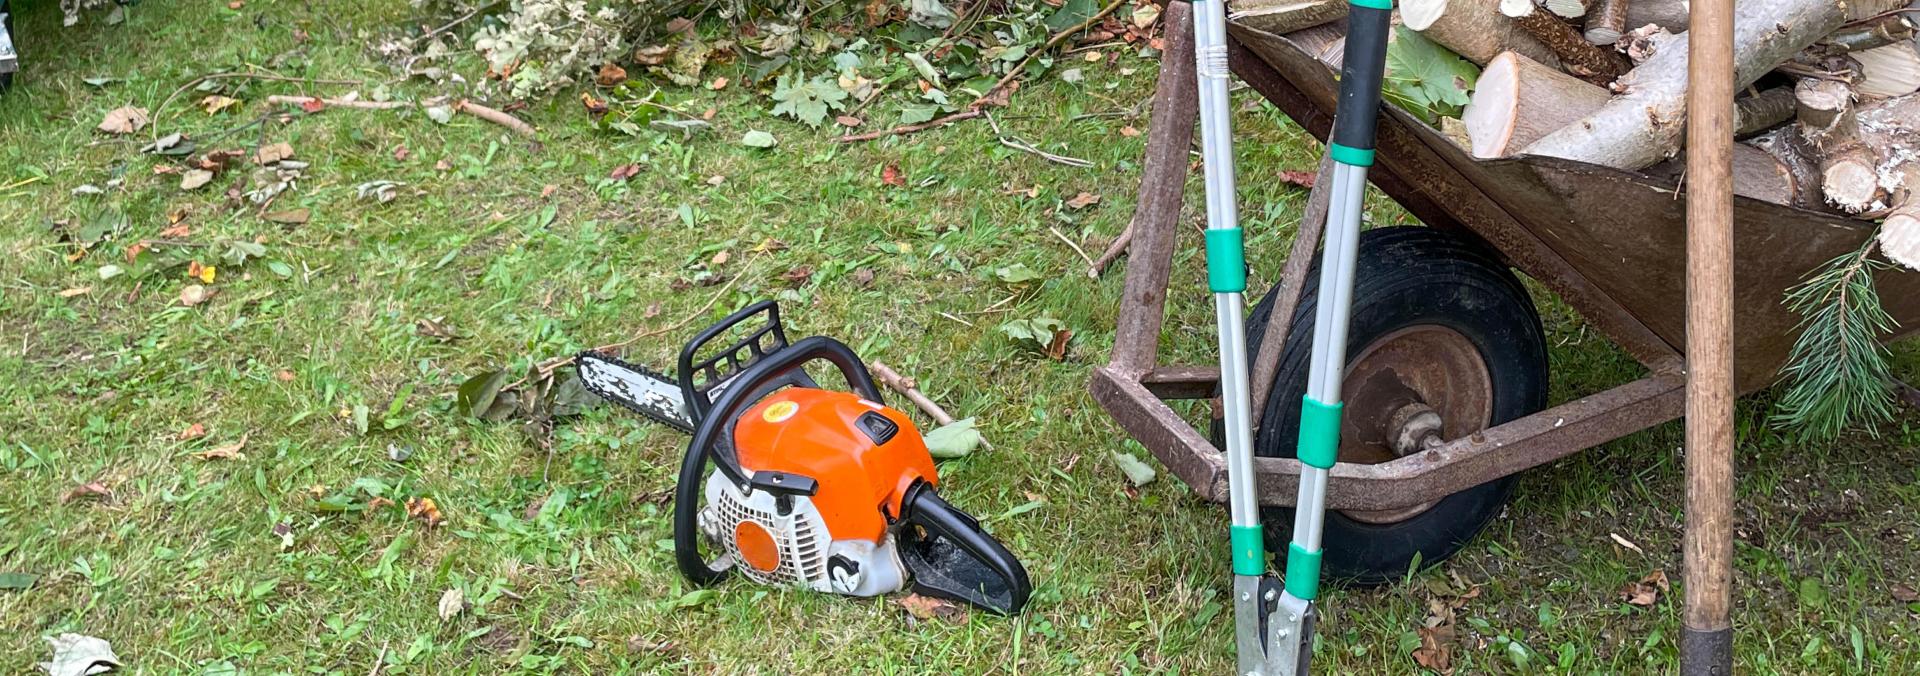 Chainsaw sitting in the grass